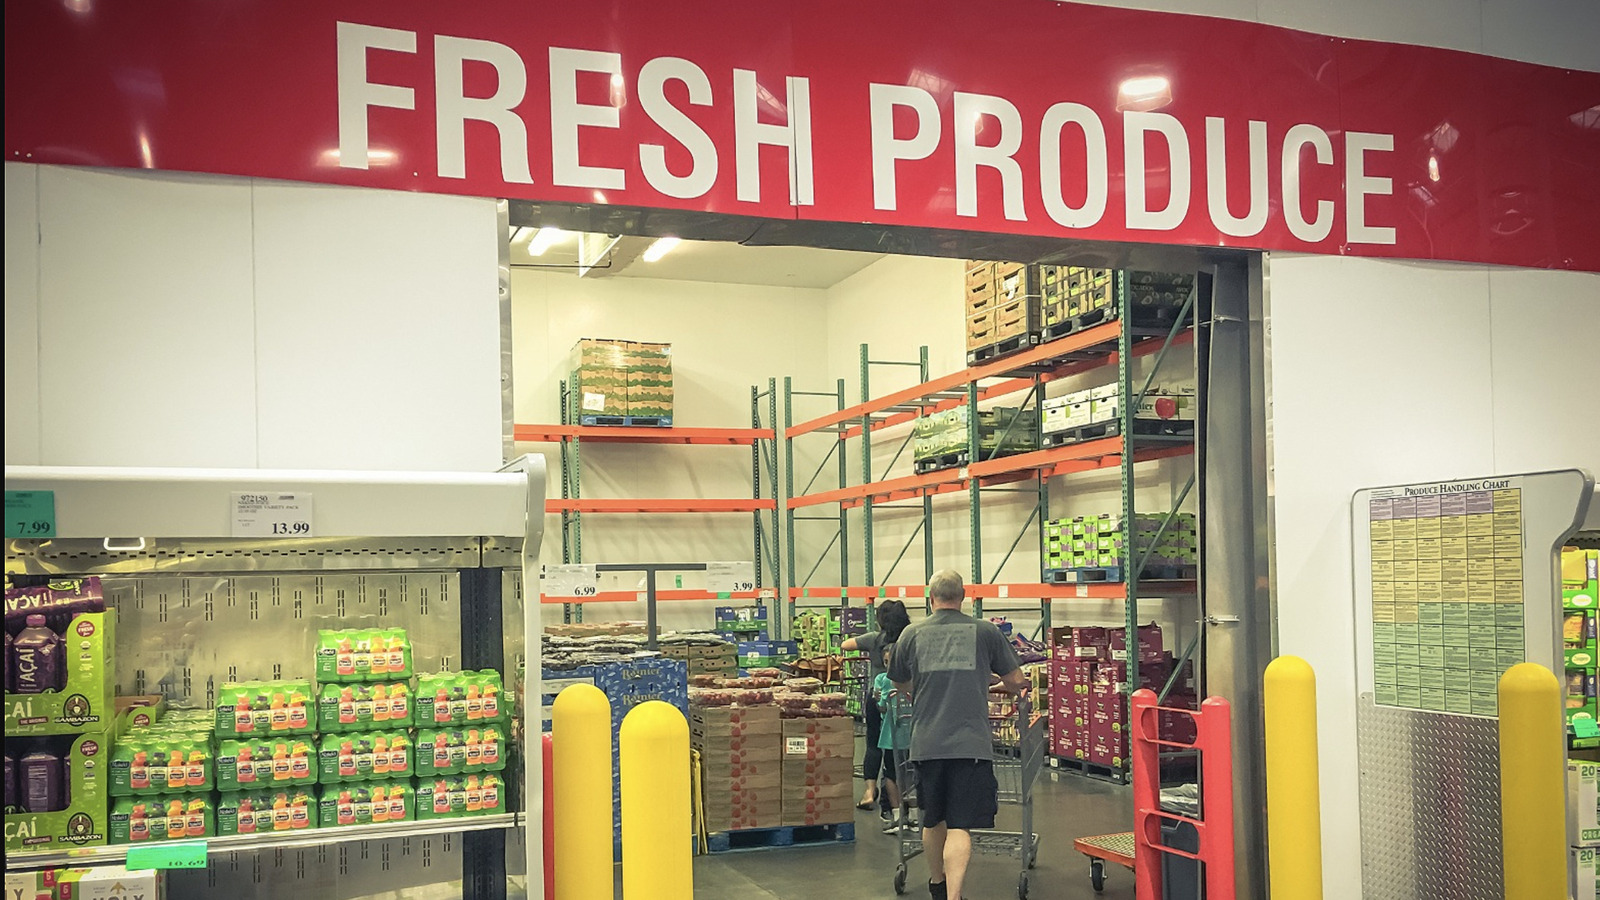 7 Things You Should NEVER Buy at Costco, According to a Shopping Expert